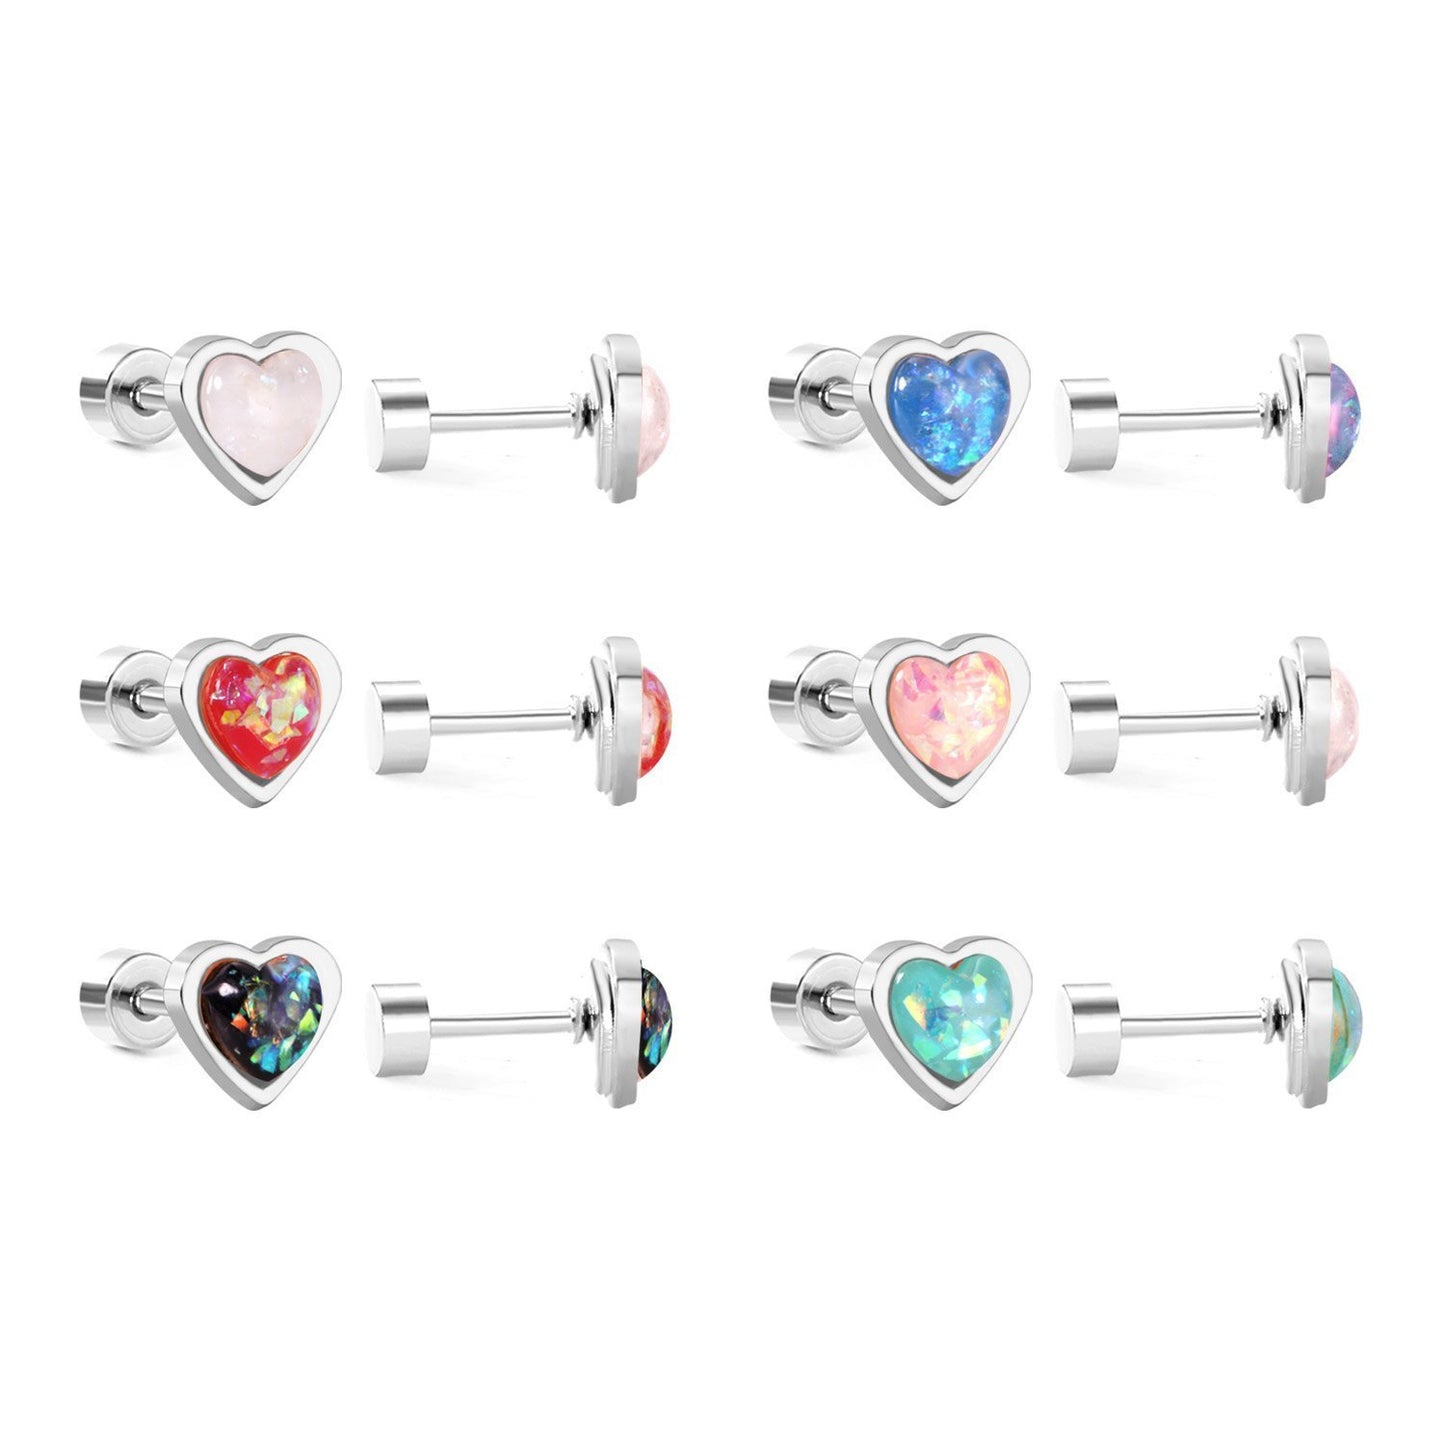 Children's, Teens' and Mothers' Earrings:  Surgical Steel, Sparkly Enamel Heart Earrings with Screw Backs - Red